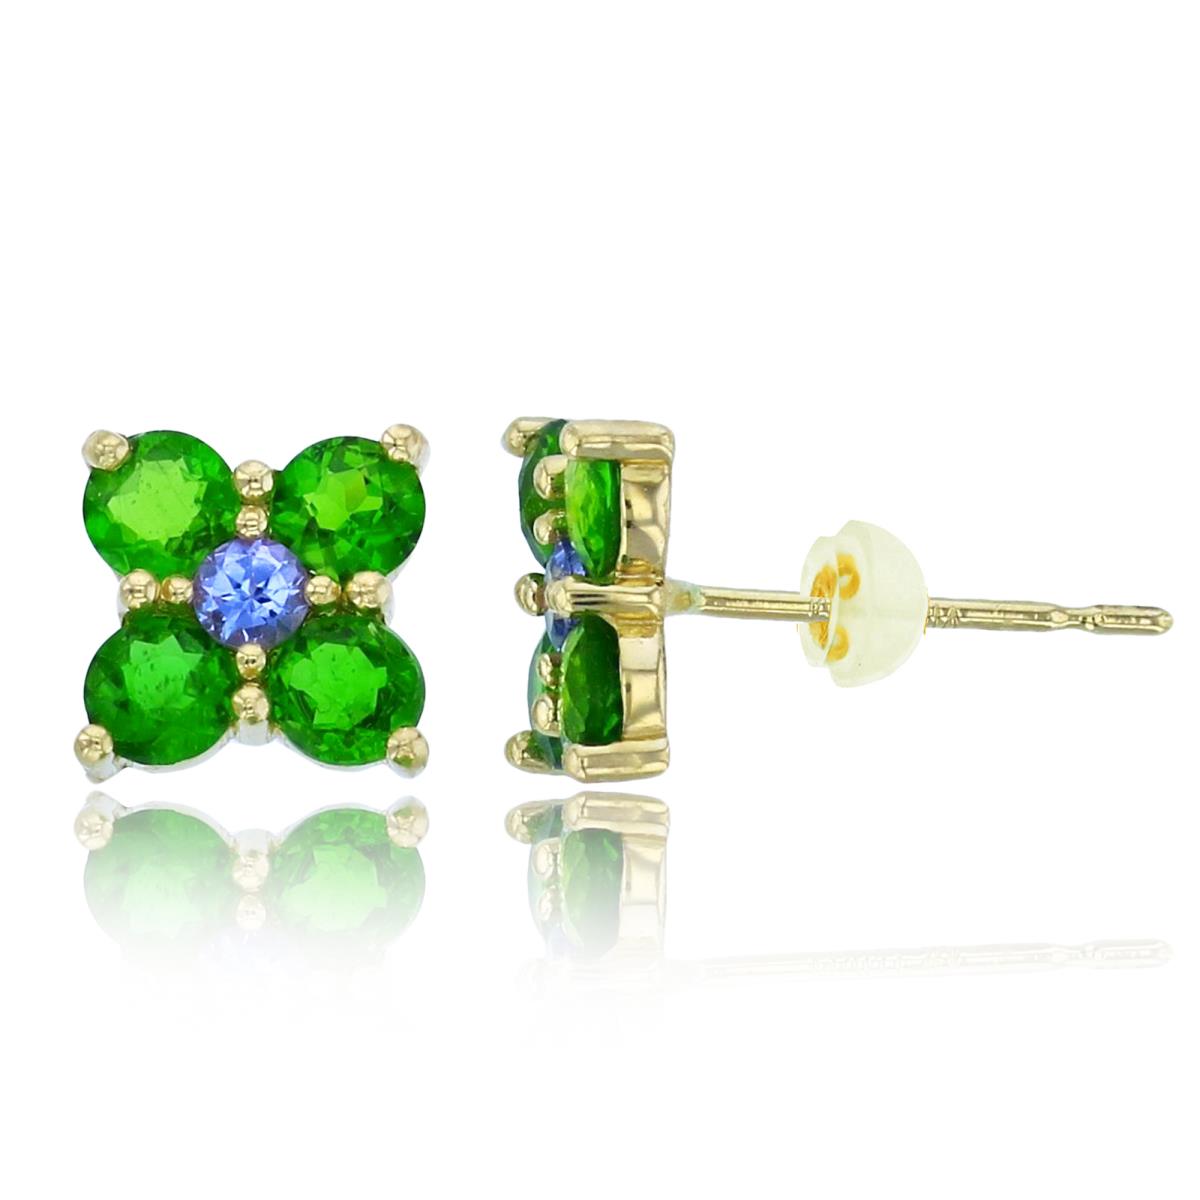 10K Yellow Gold Rnd Chrom Diopside & Tanzanite Flower Studs with Silicon Backs